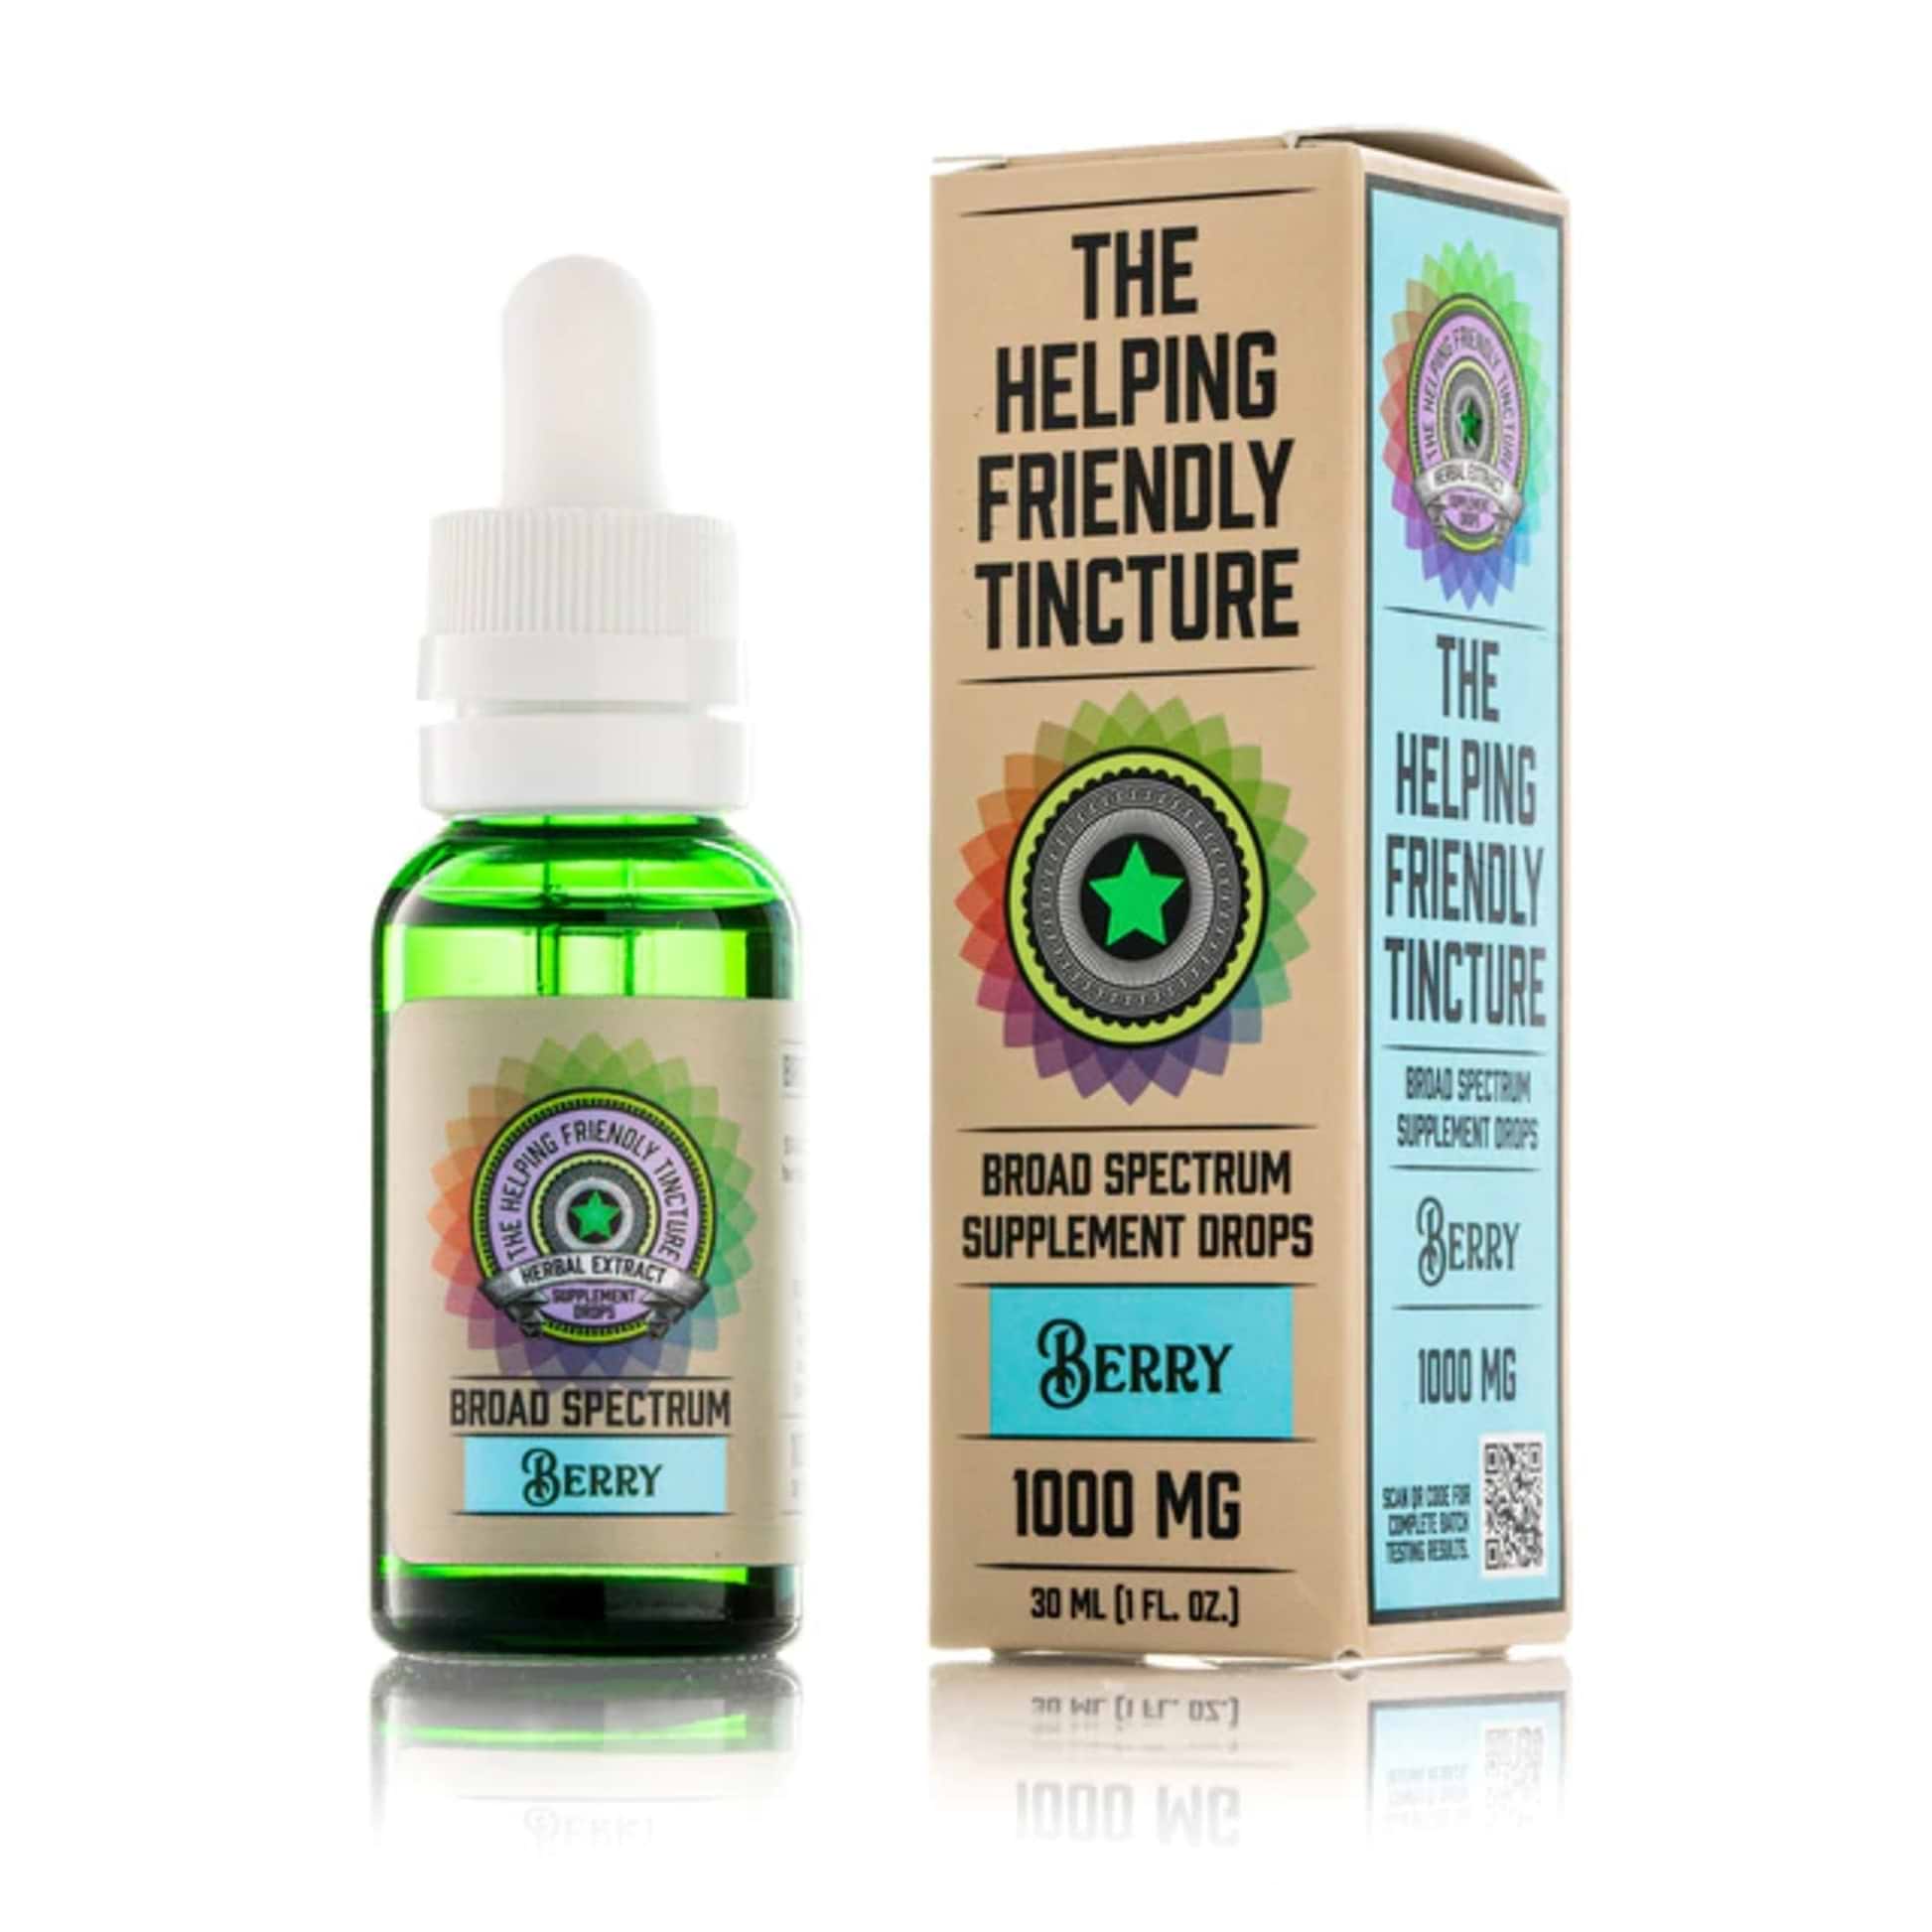 The Helping Friendly Broad Spectrum Tincture - 1000mg 1000mg / Berry